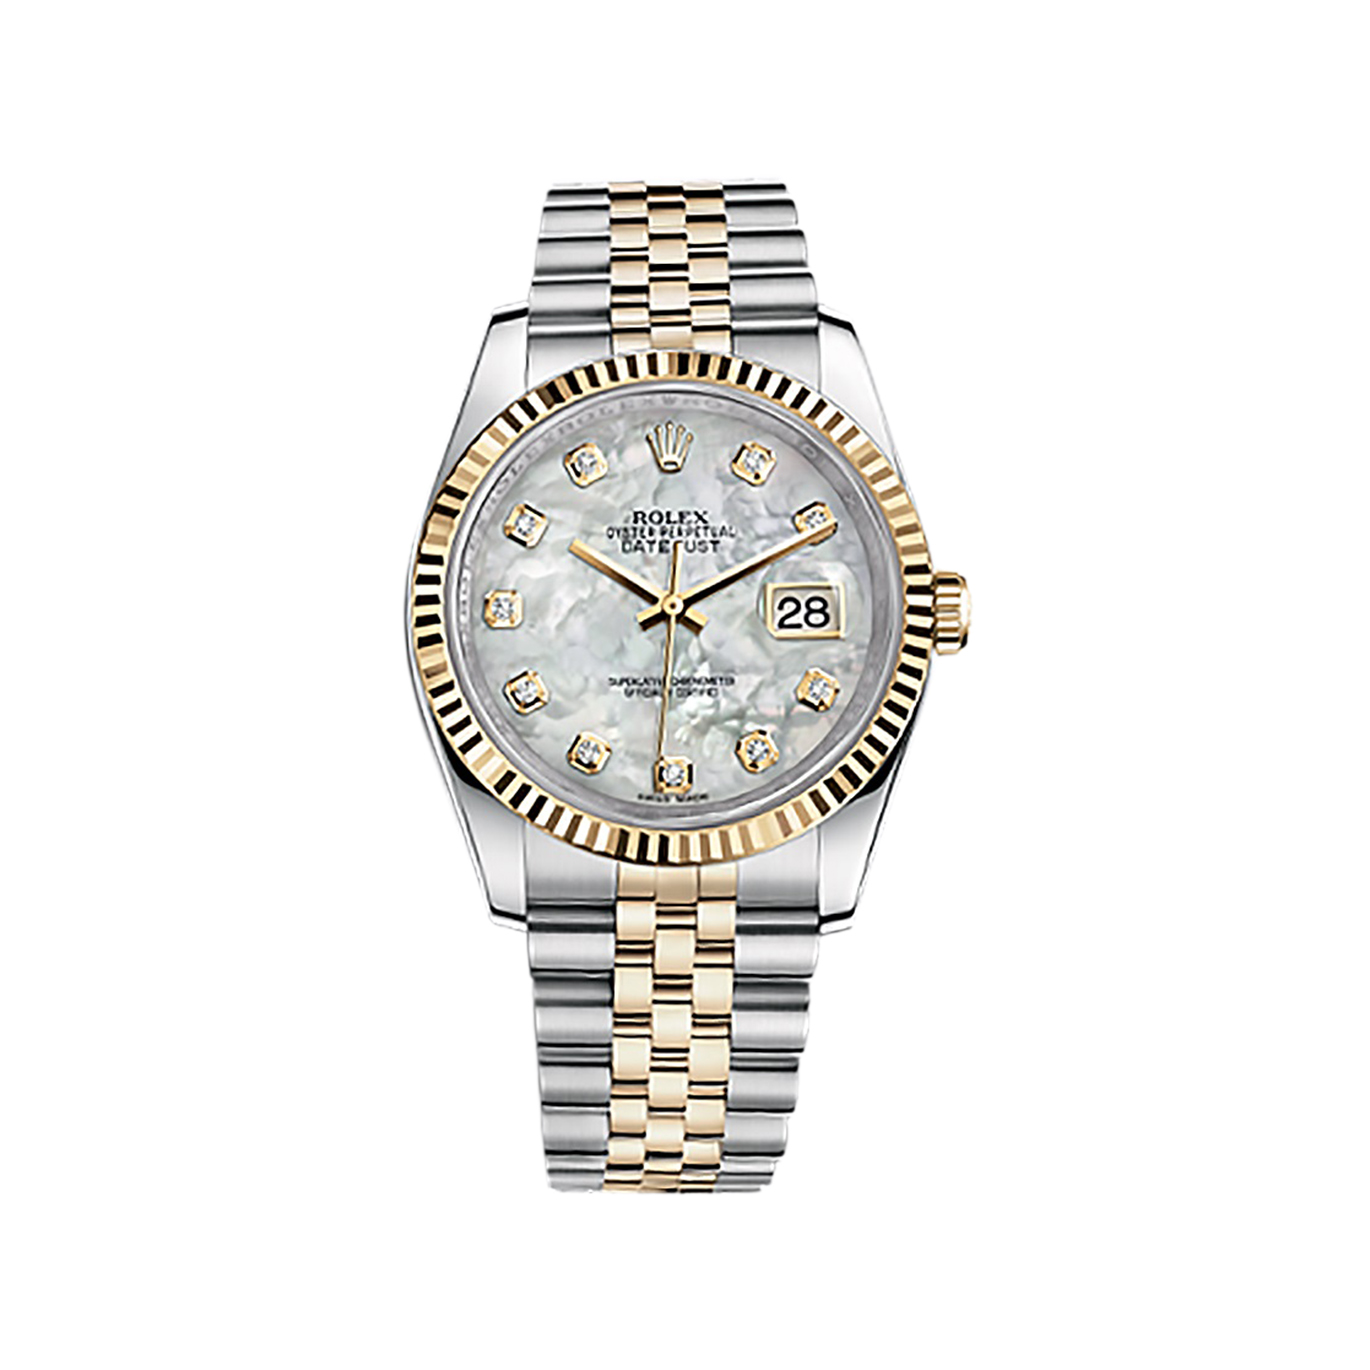 Datejust 36 116233 Gold & Stainless Steel Watch (White Mother-of-Pearl Set with Diamonds) - Click Image to Close